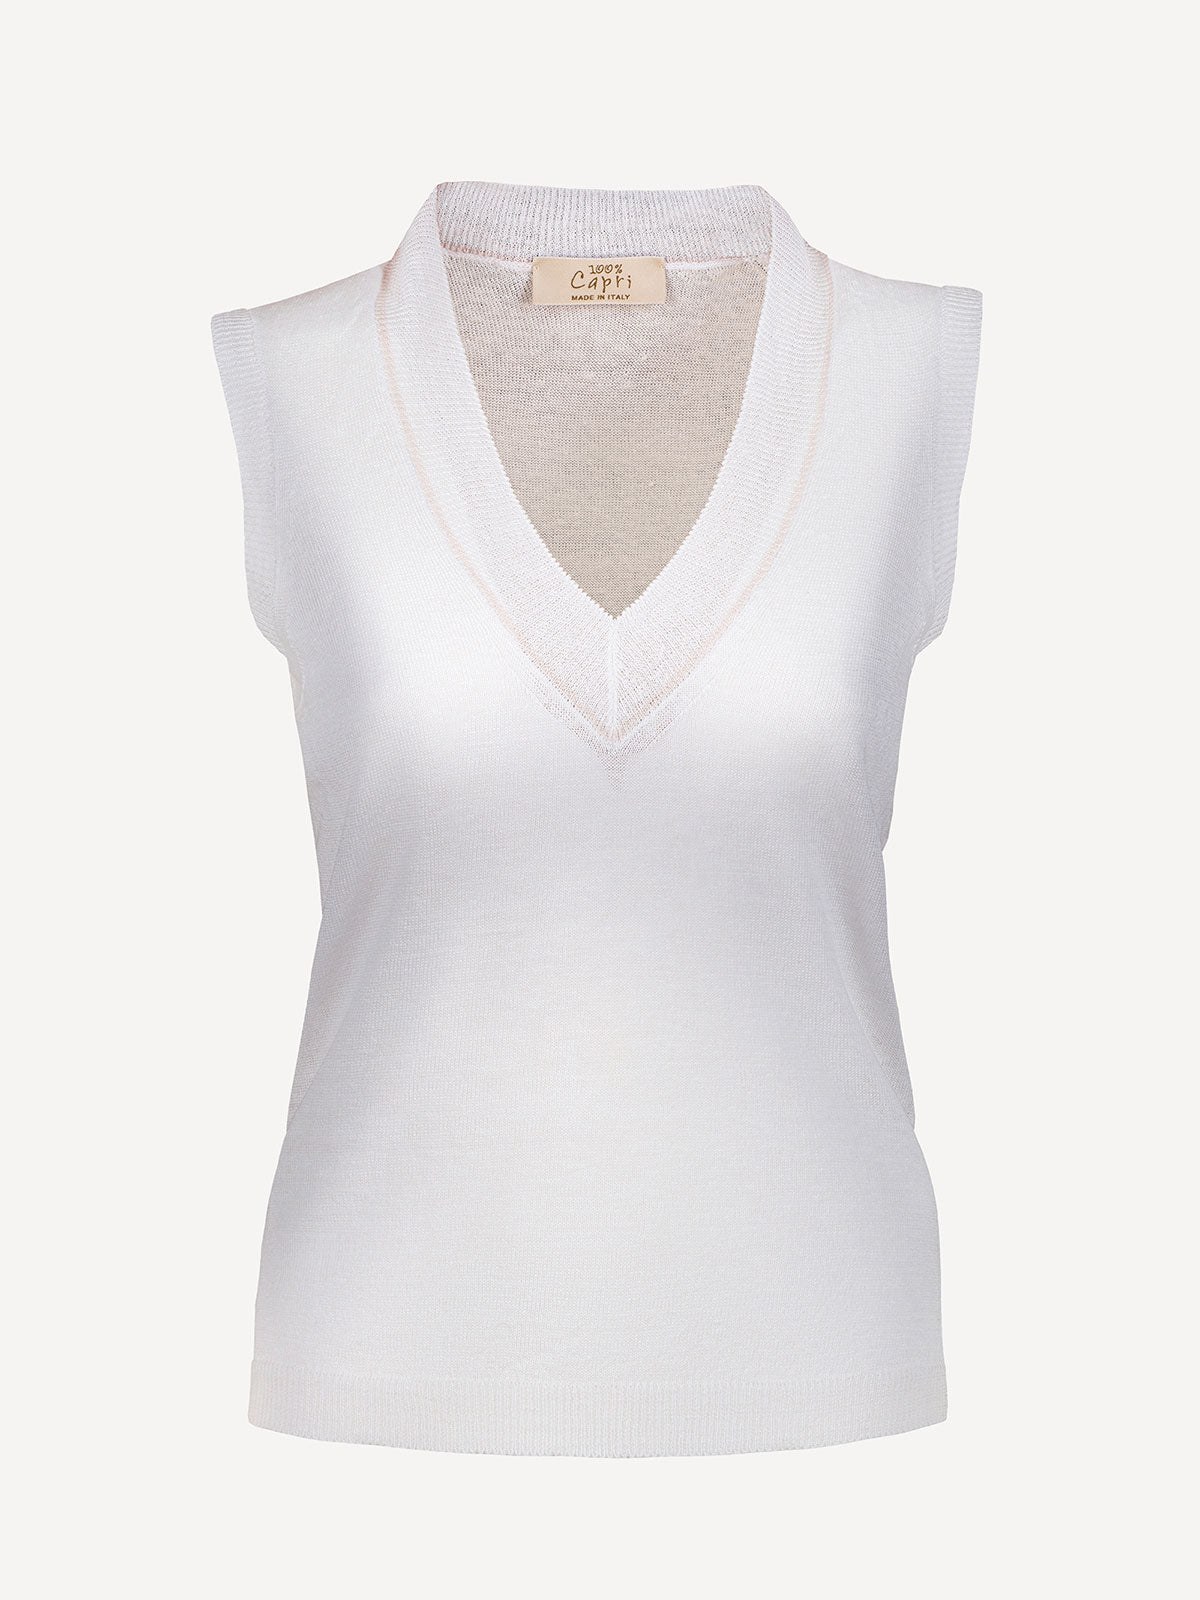 Top St Barth 100 Capri White and pink linen top front